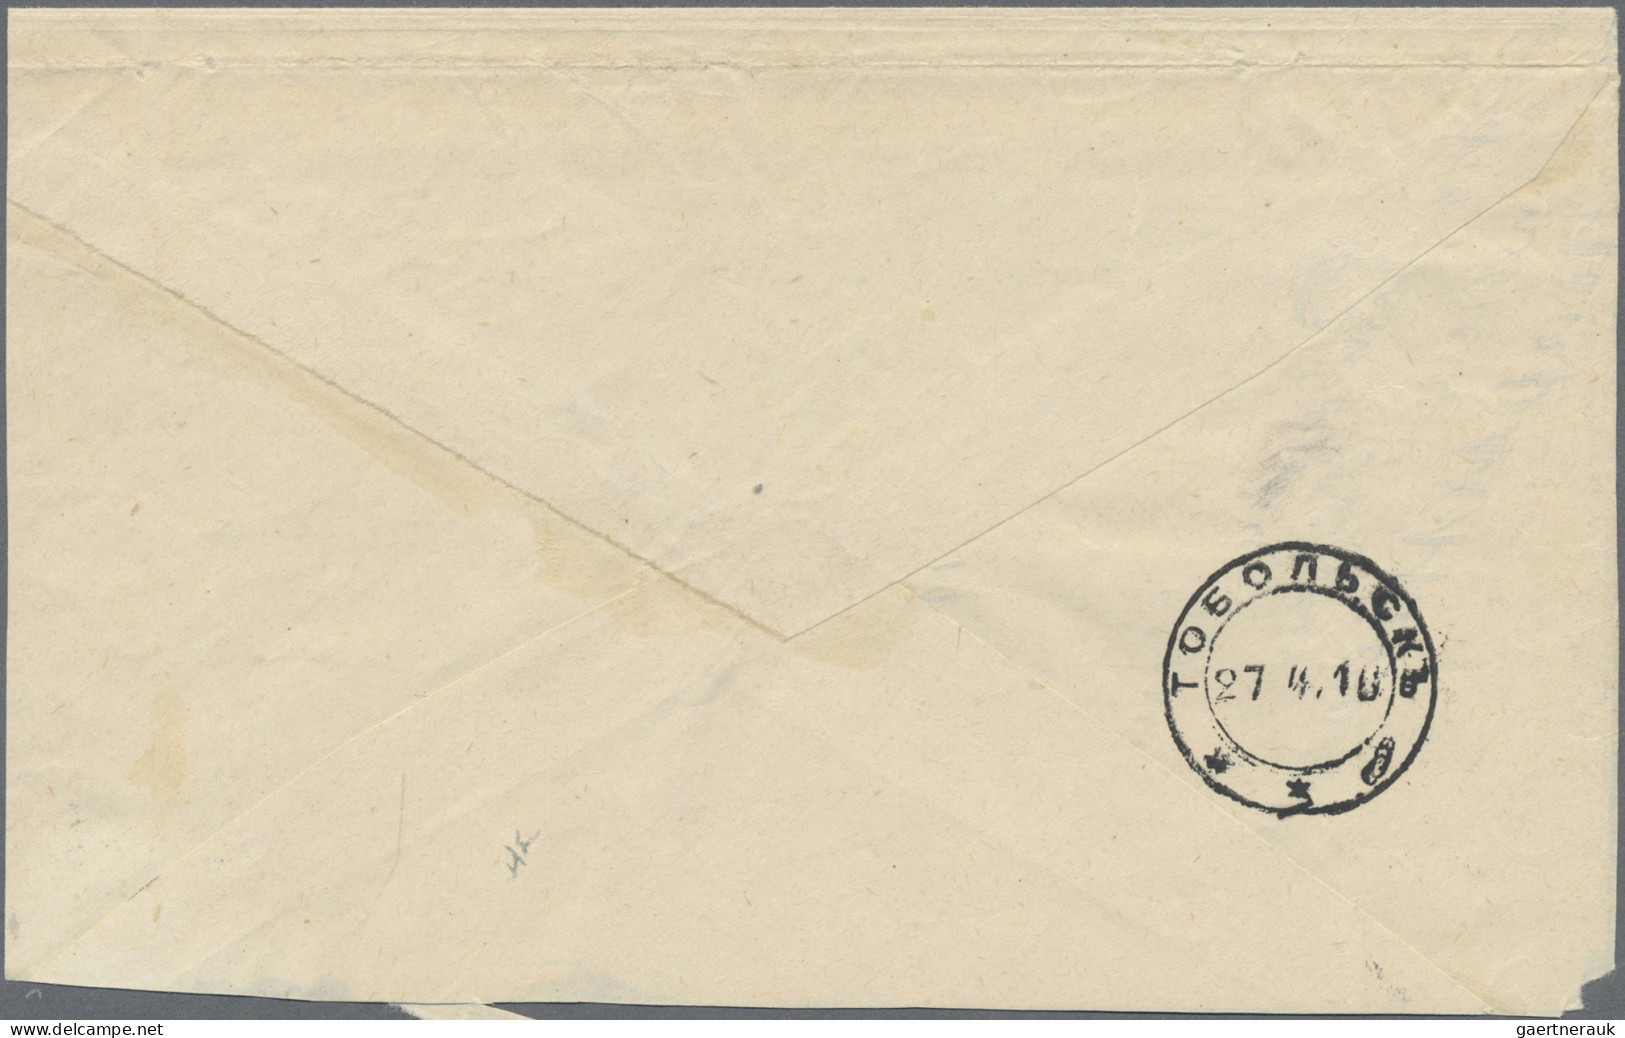 Russia: 1910/1916, Siberia, four entires: registered stampless district cover TO